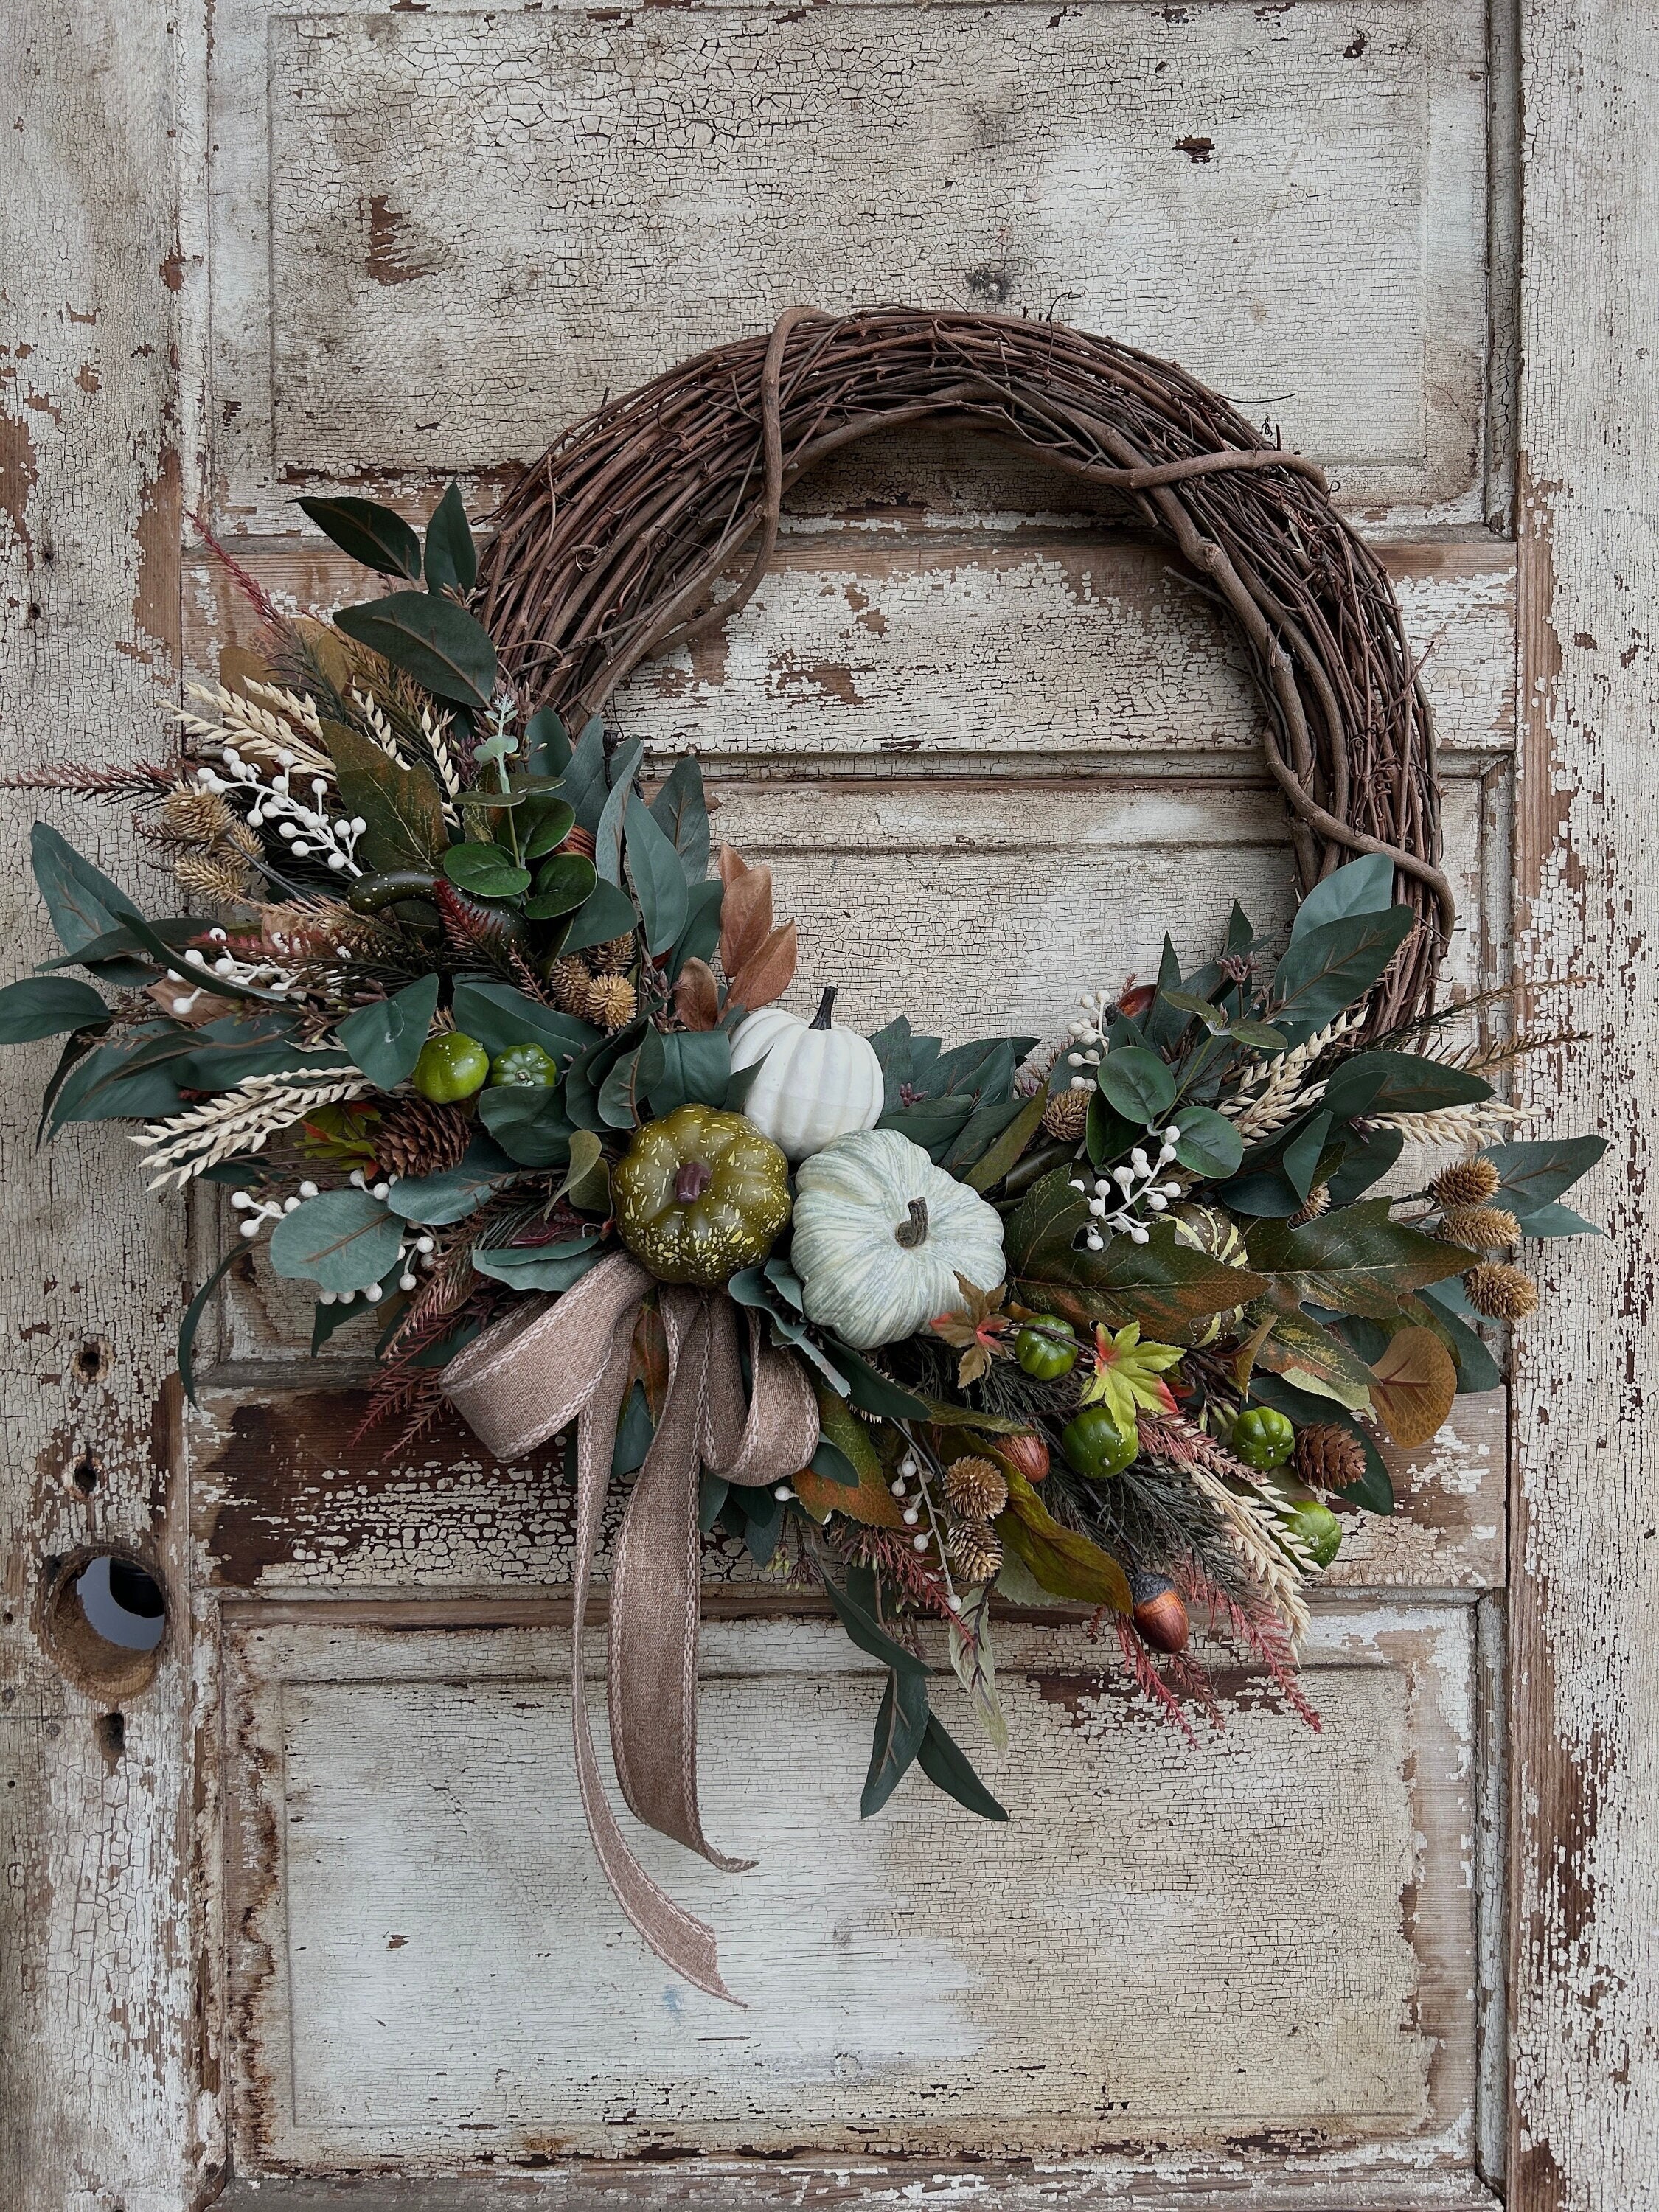 Williamsburg 5 ft. Lavender and Wildflower Garland with Greenery